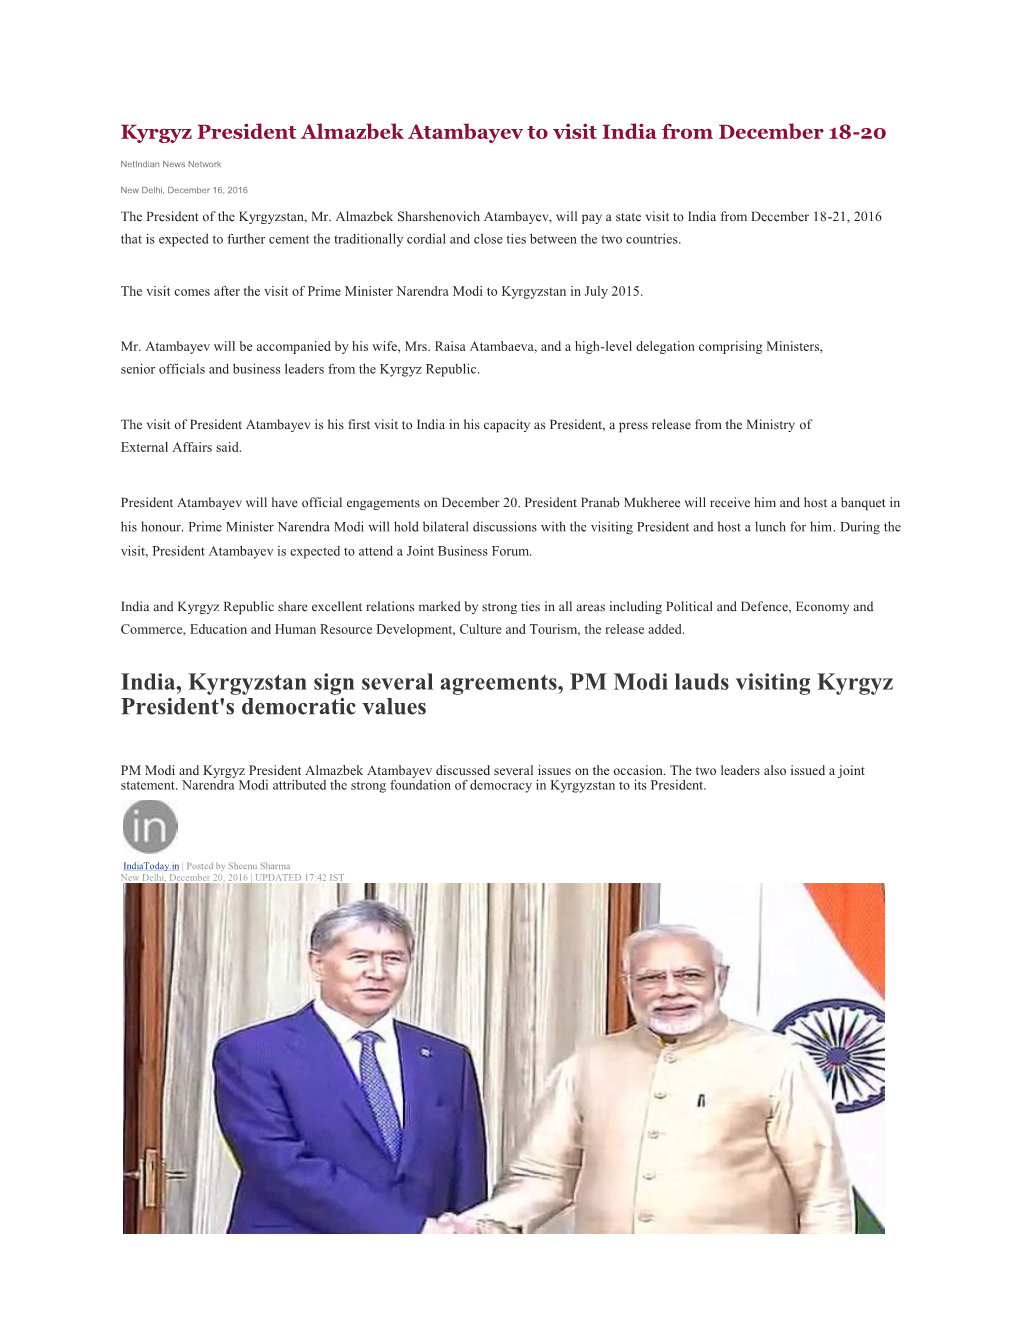 India, Kyrgyzstan Sign Several Agreements, PM Modi Lauds Visiting Kyrgyz President's Democratic Values